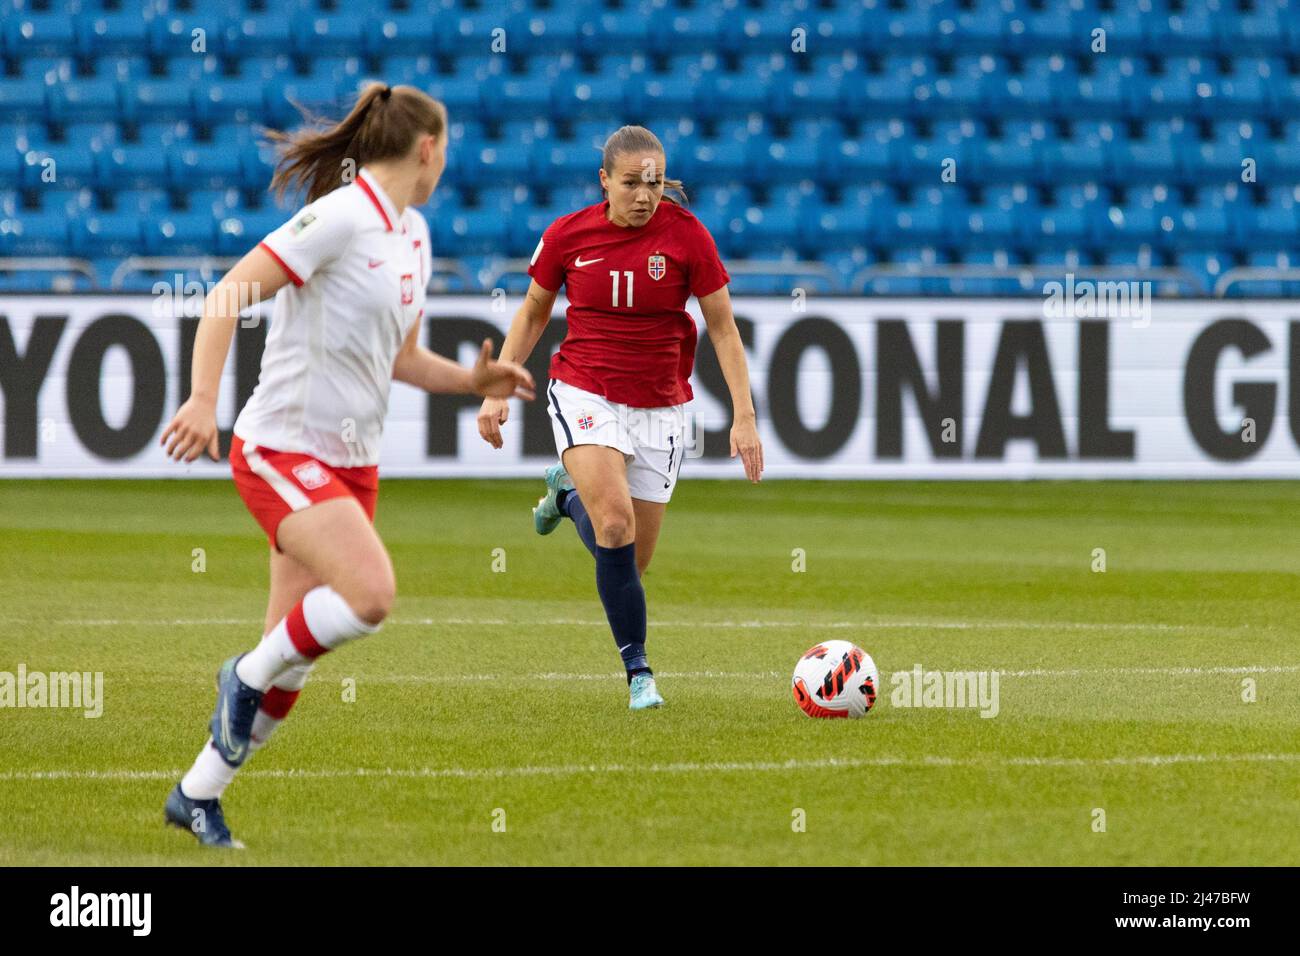 Oslo, Norway. 12th Apr, 2022. Guro Reiten (11 Norway) controls the ball during the Womens World Cup Qualifier football match between Norway and Poland at Ullevaal Stadium in Oslo, Norway. Ane Frosaker/SPP Credit: SPP Sport Press Photo. /Alamy Live News Stock Photo